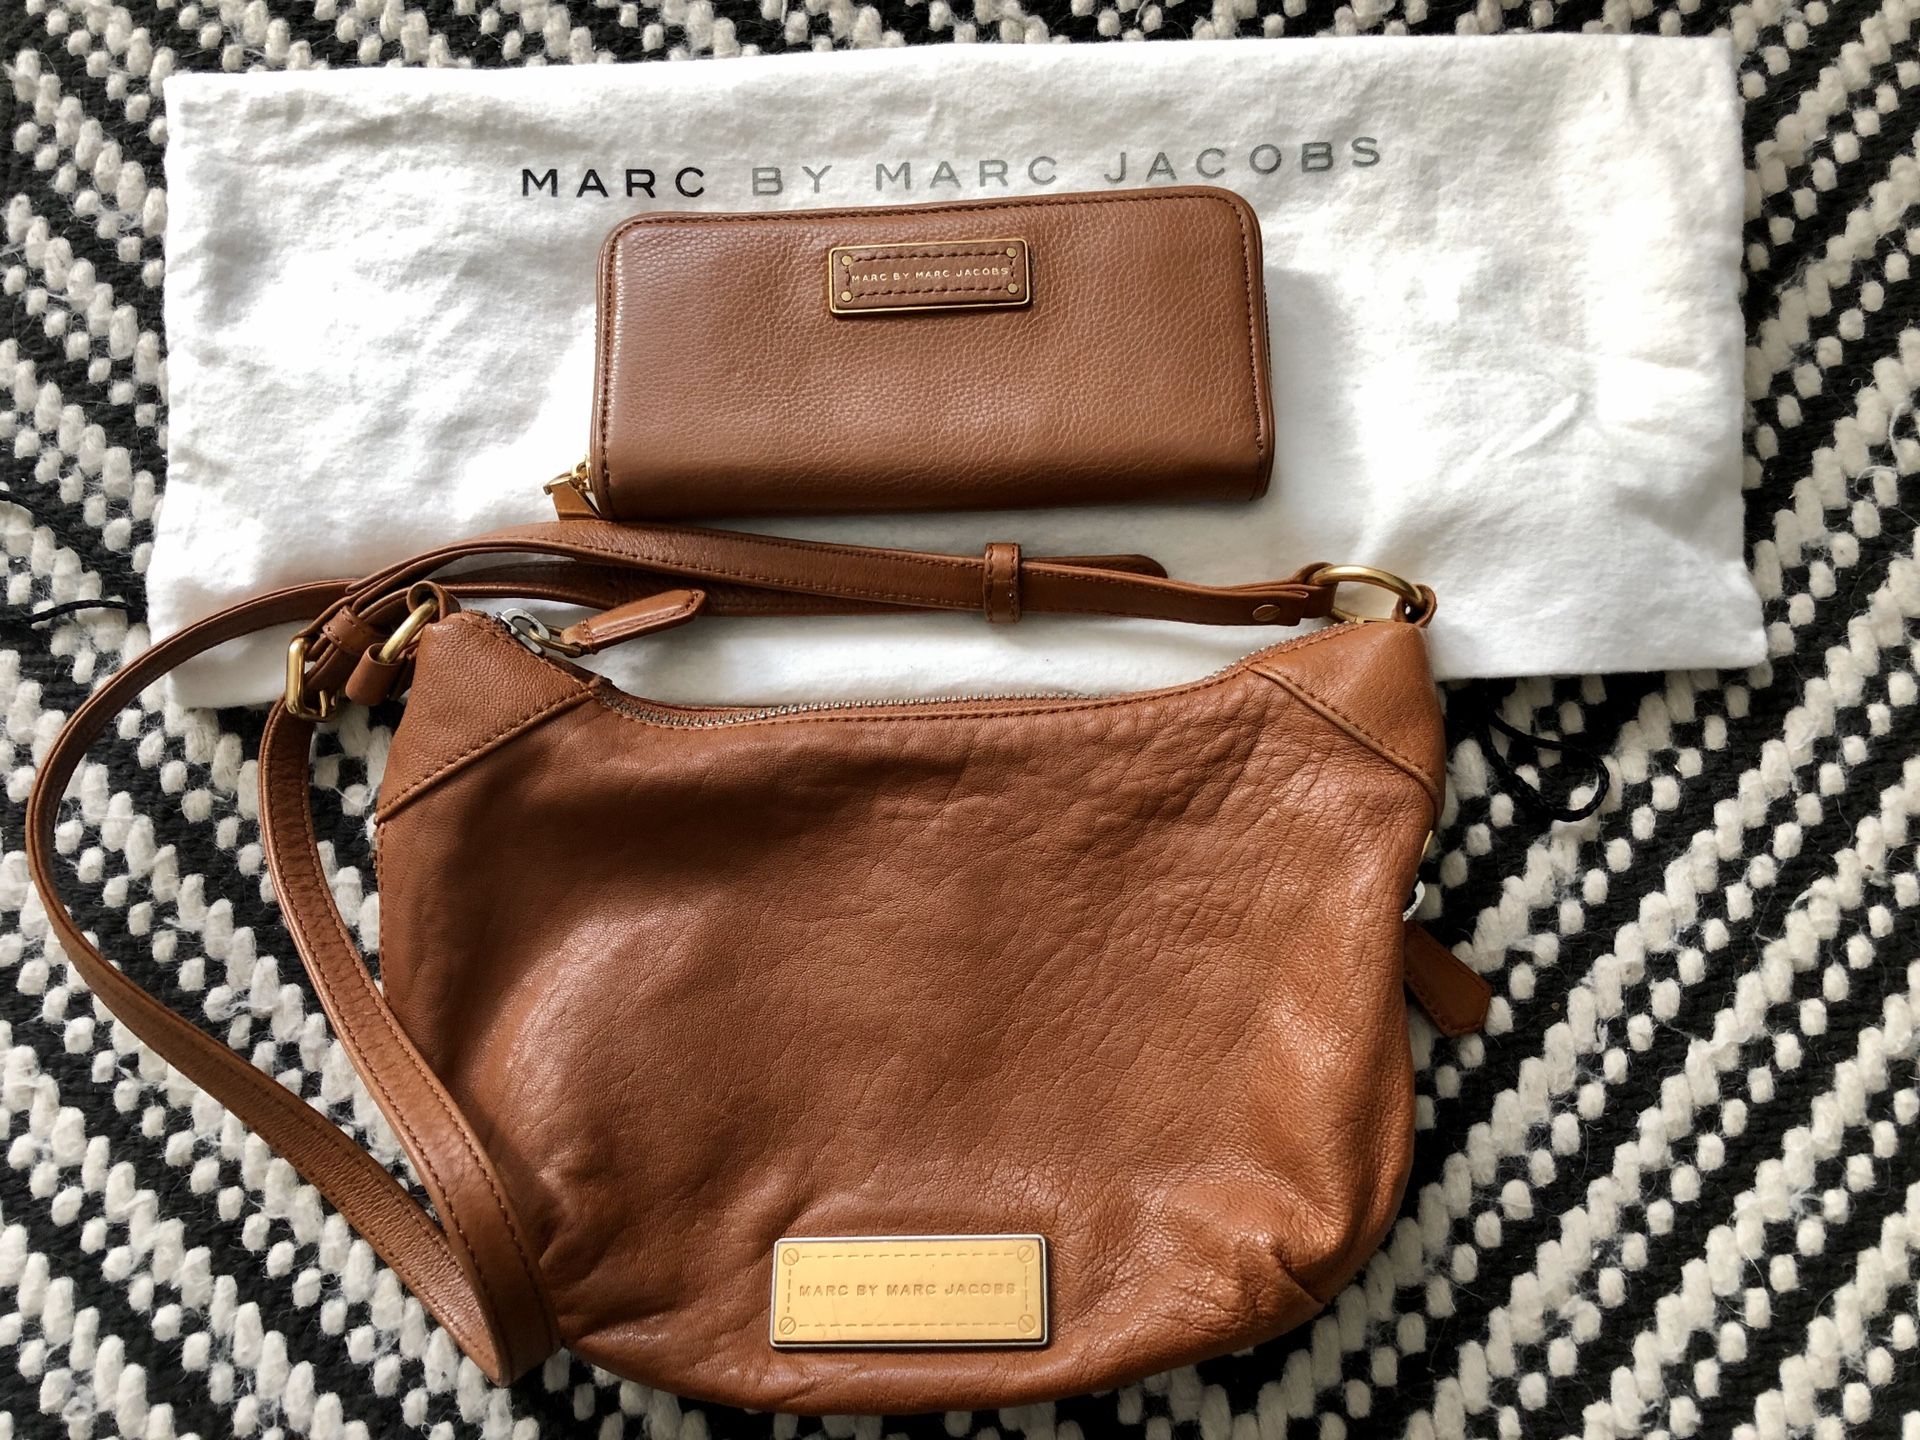 Marc Jacobs Crossbody Bag and Wallet